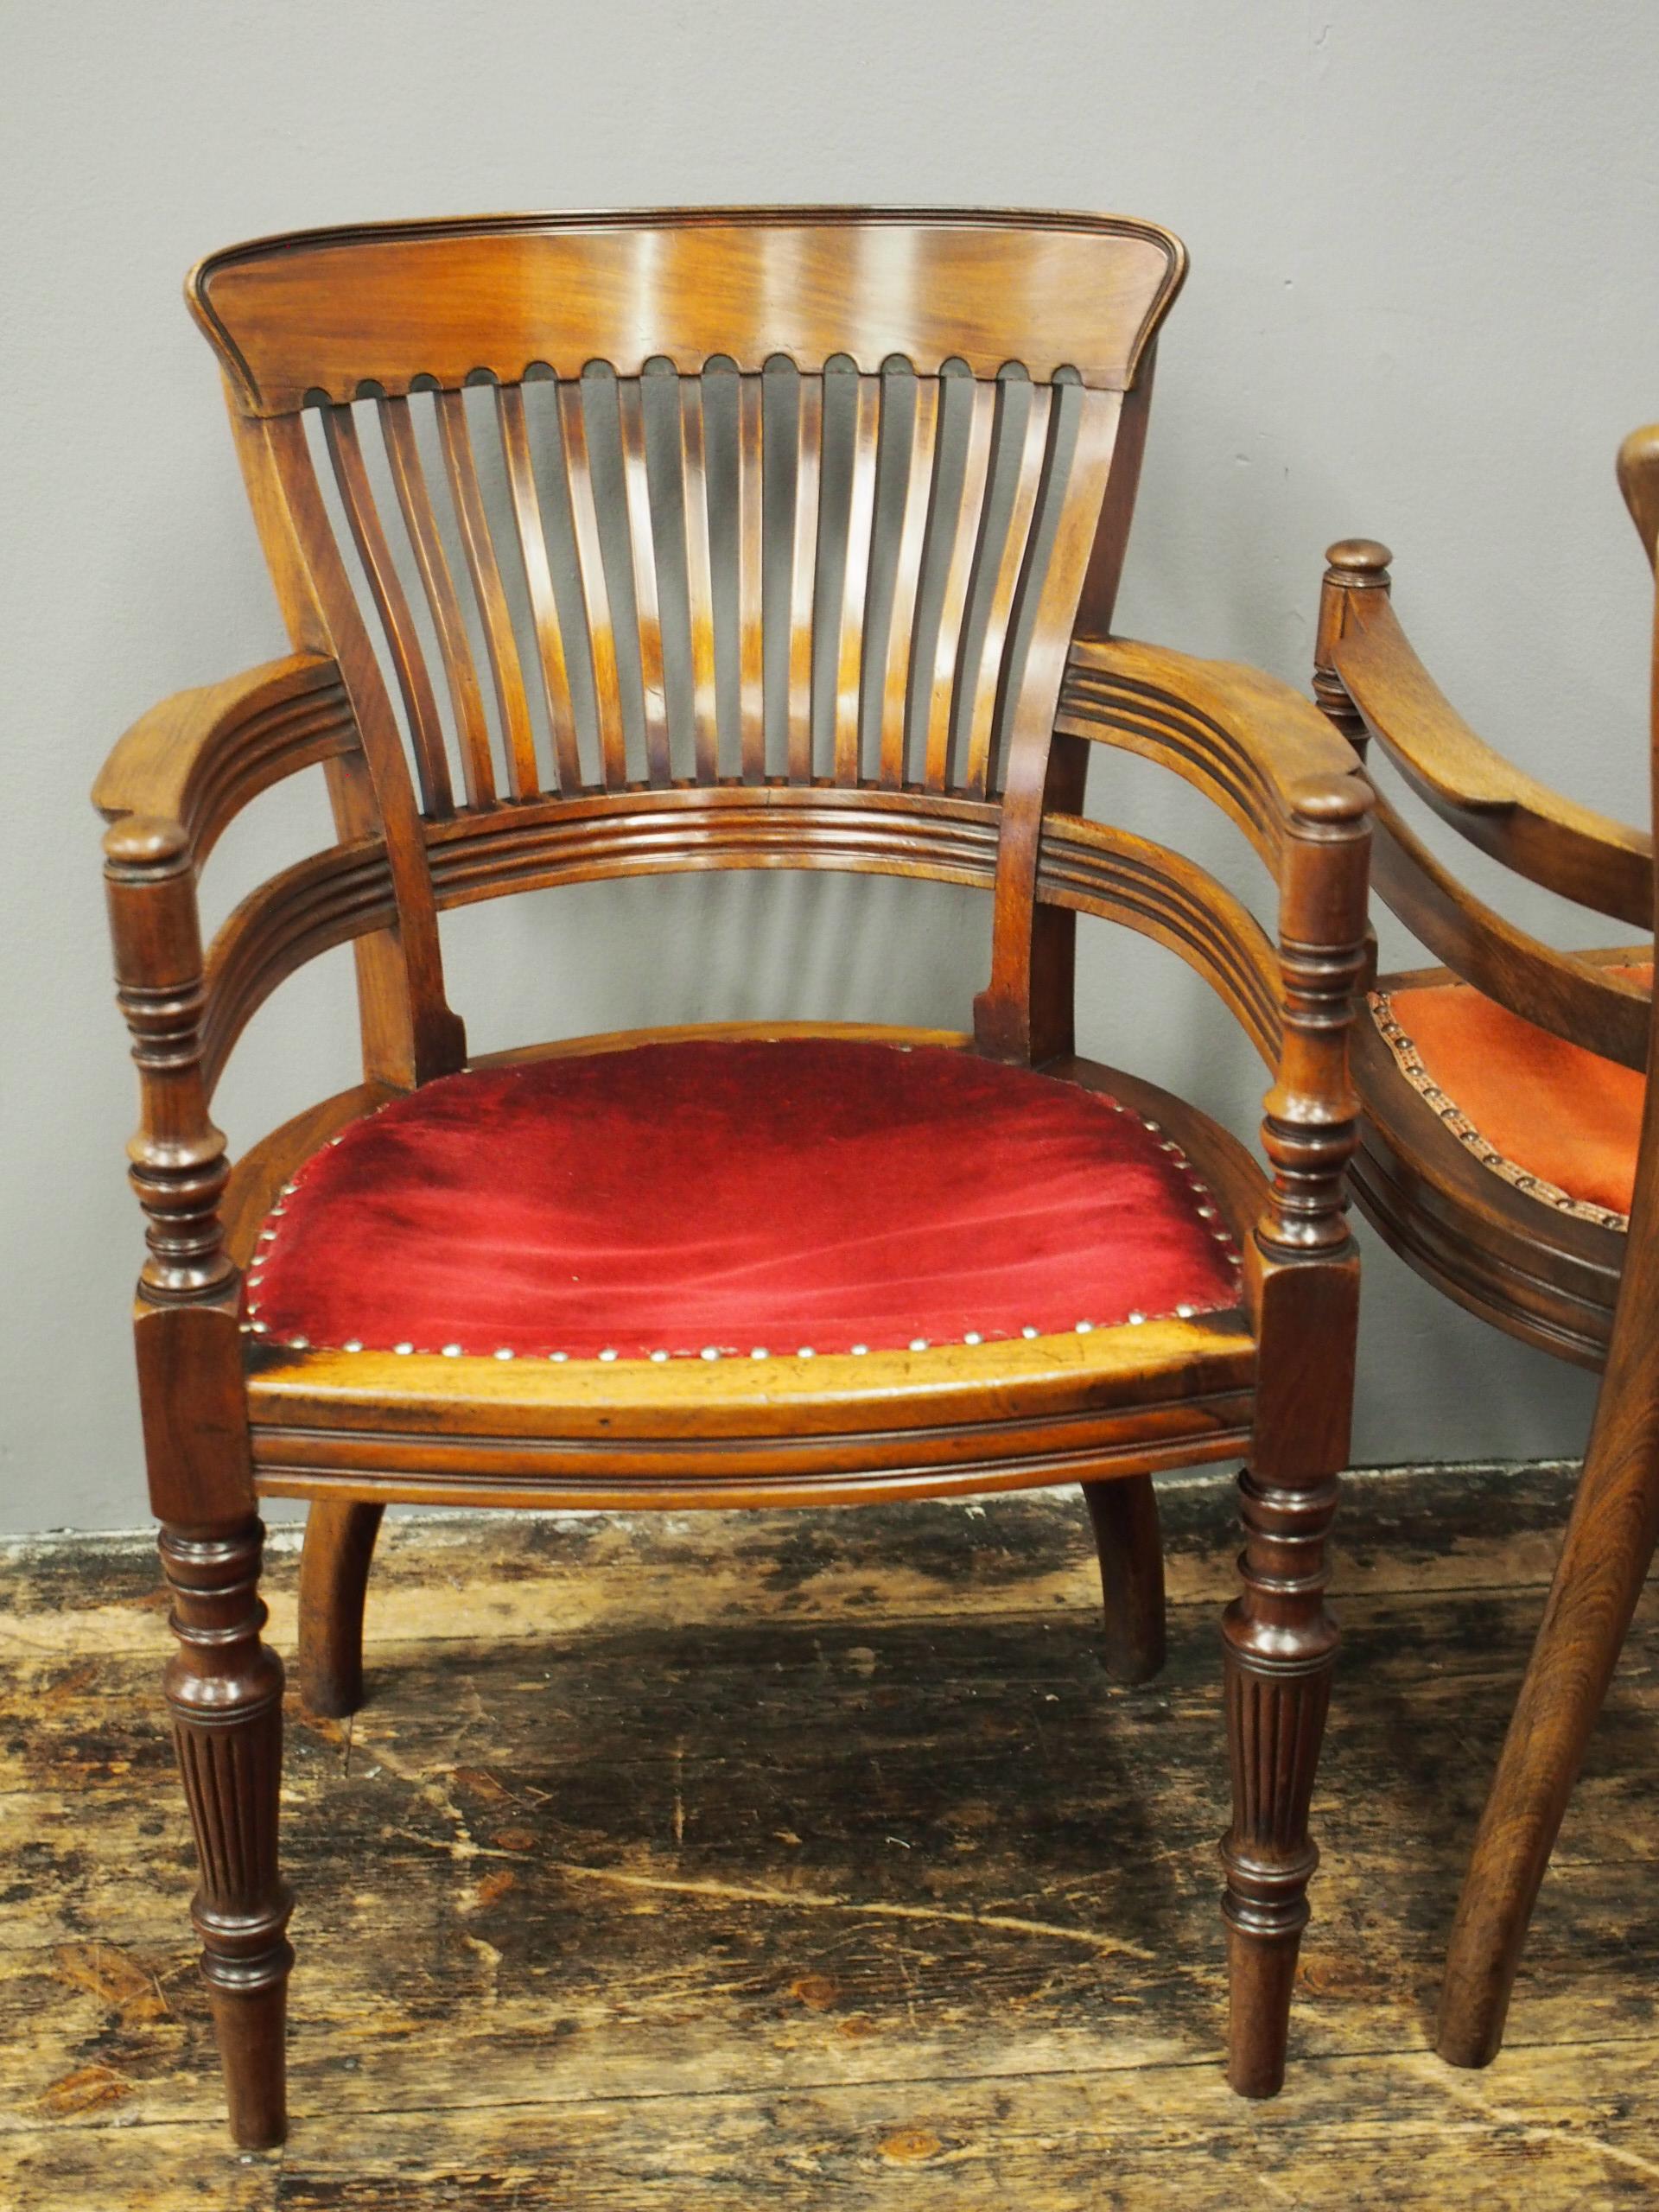 Pair of Edwardian mahogany office chairs, circa 1900. The curved top rail is on shaped splats and supports, and sits above a fluted lower rail that continues on to fluted arms. The turned arm supports extend down to become the turned front feet, and